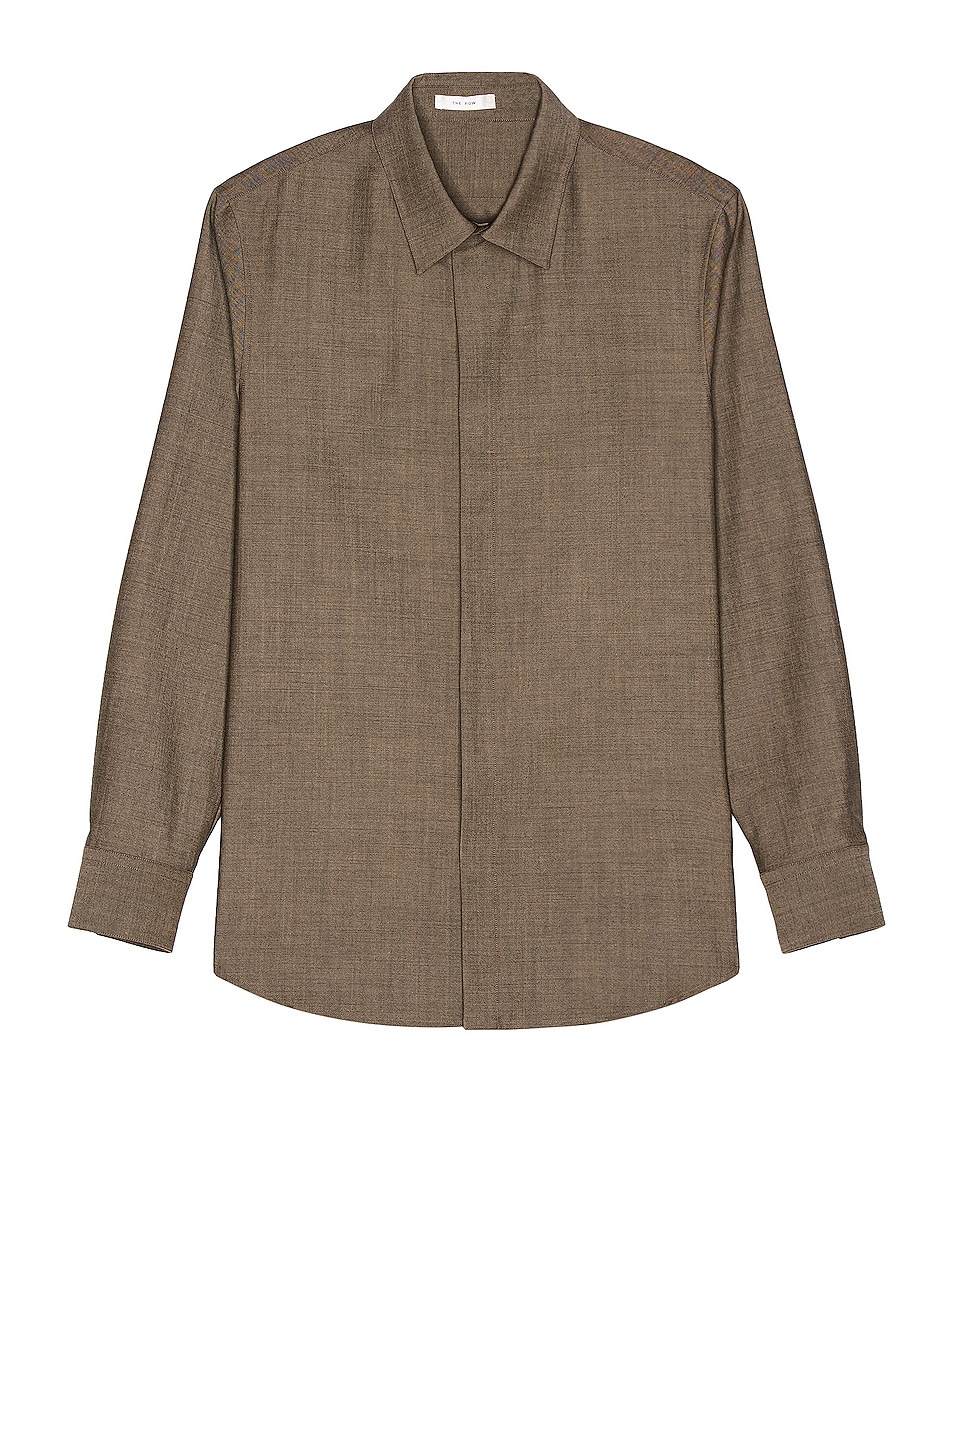 Image 1 of The Row Zachary Shirt in Camel & Black